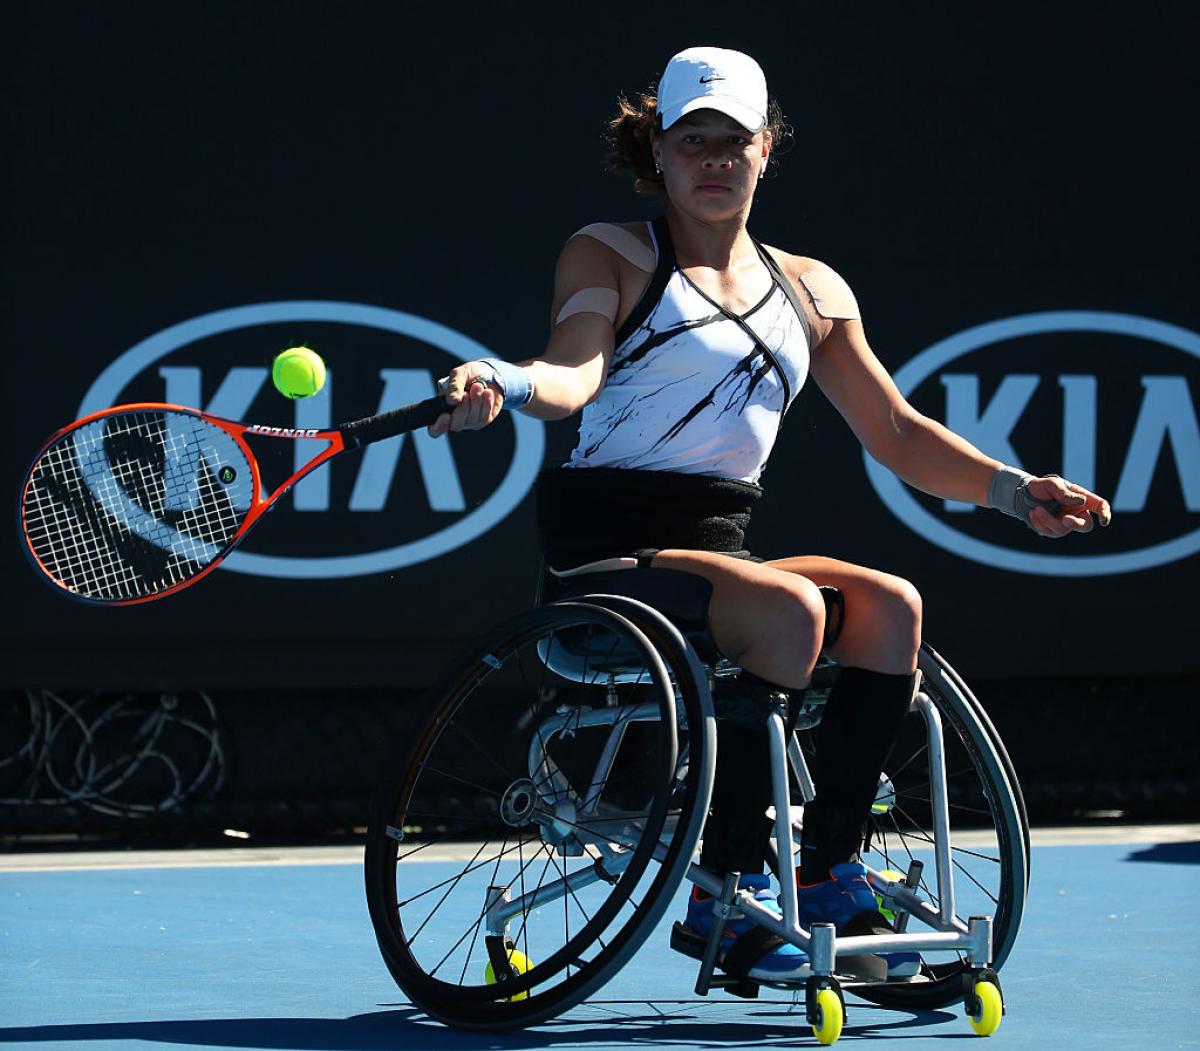 Marjolein Buis of the Netherlands competes against Lucy Shuker of Great Britain in their Quarterfinal match during the Australian Open 2017 Wheelchair Championships.